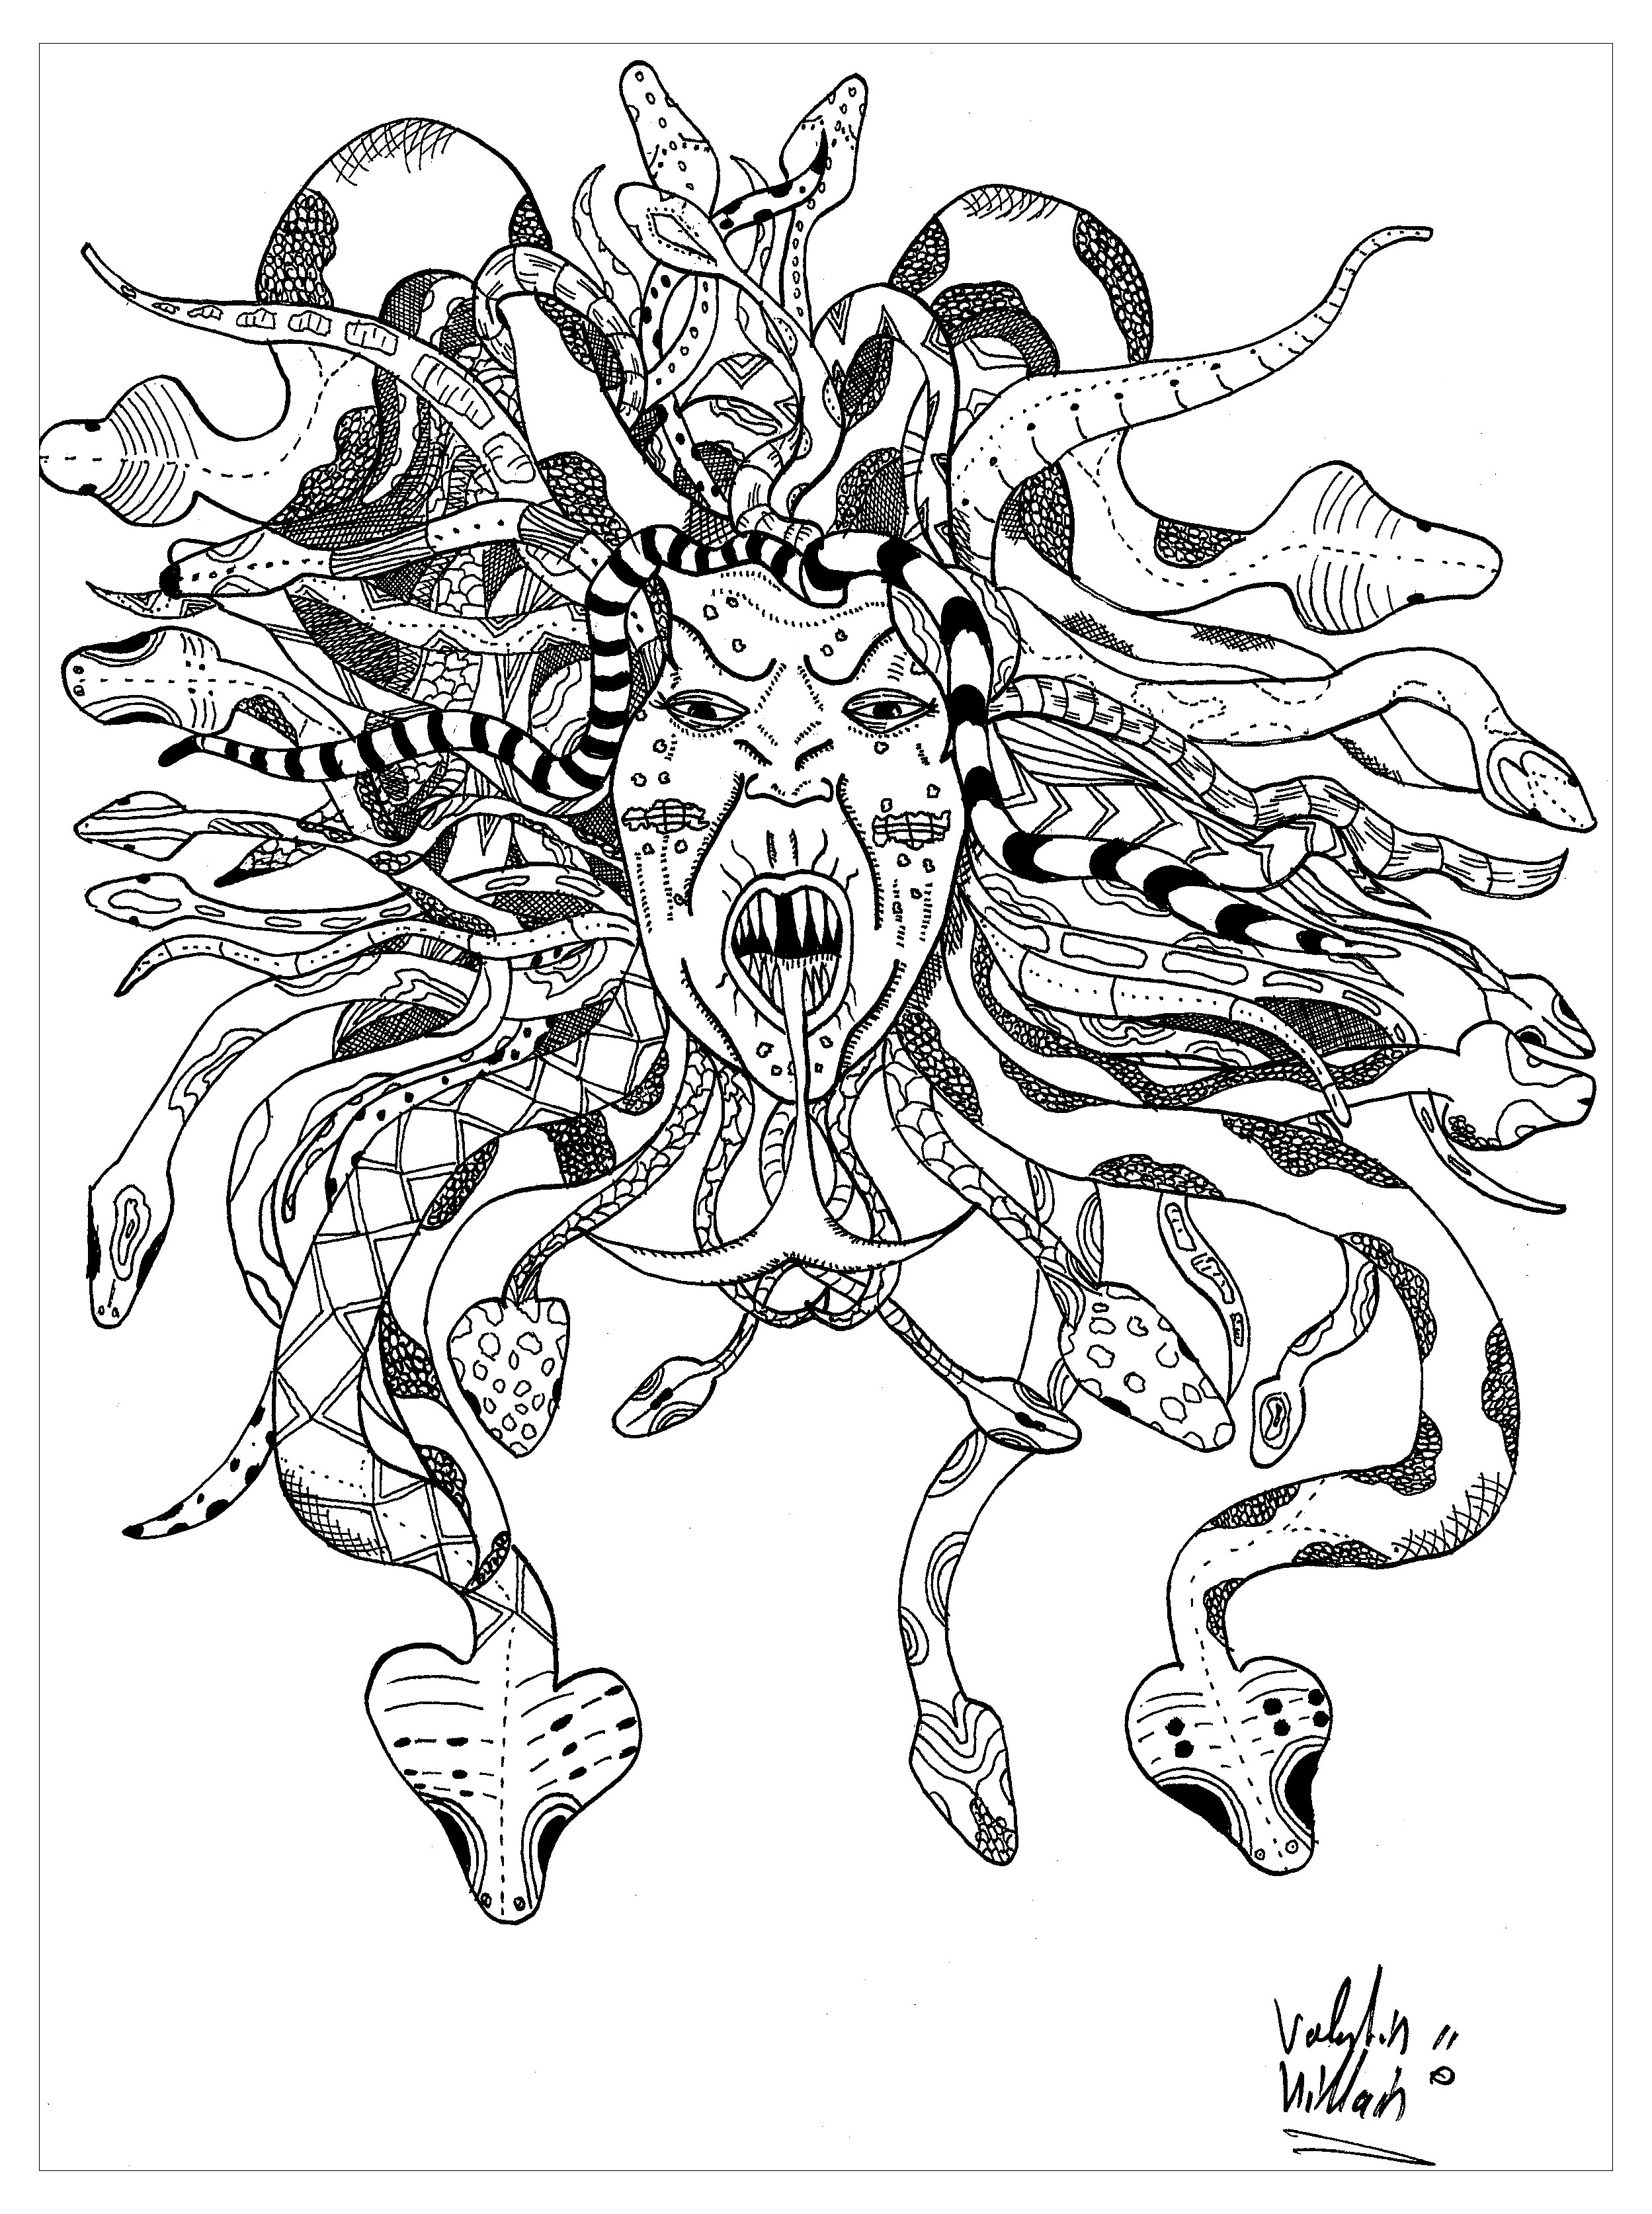 Coloring page of Medusa and her hair is interwoven with snakes